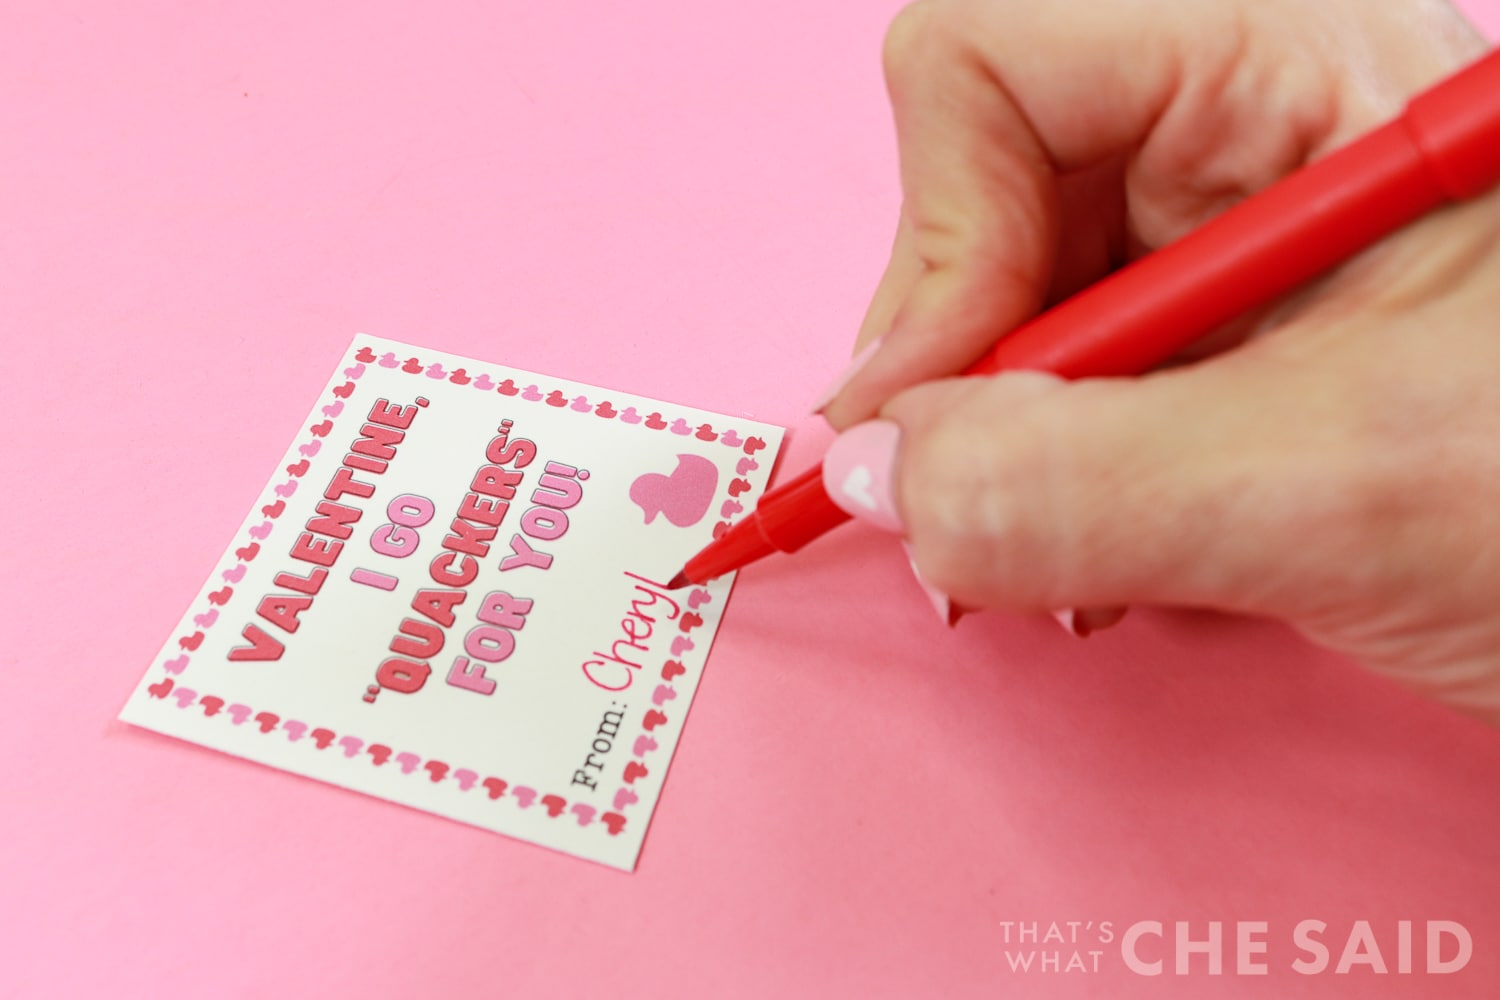 Signing the valentine cards